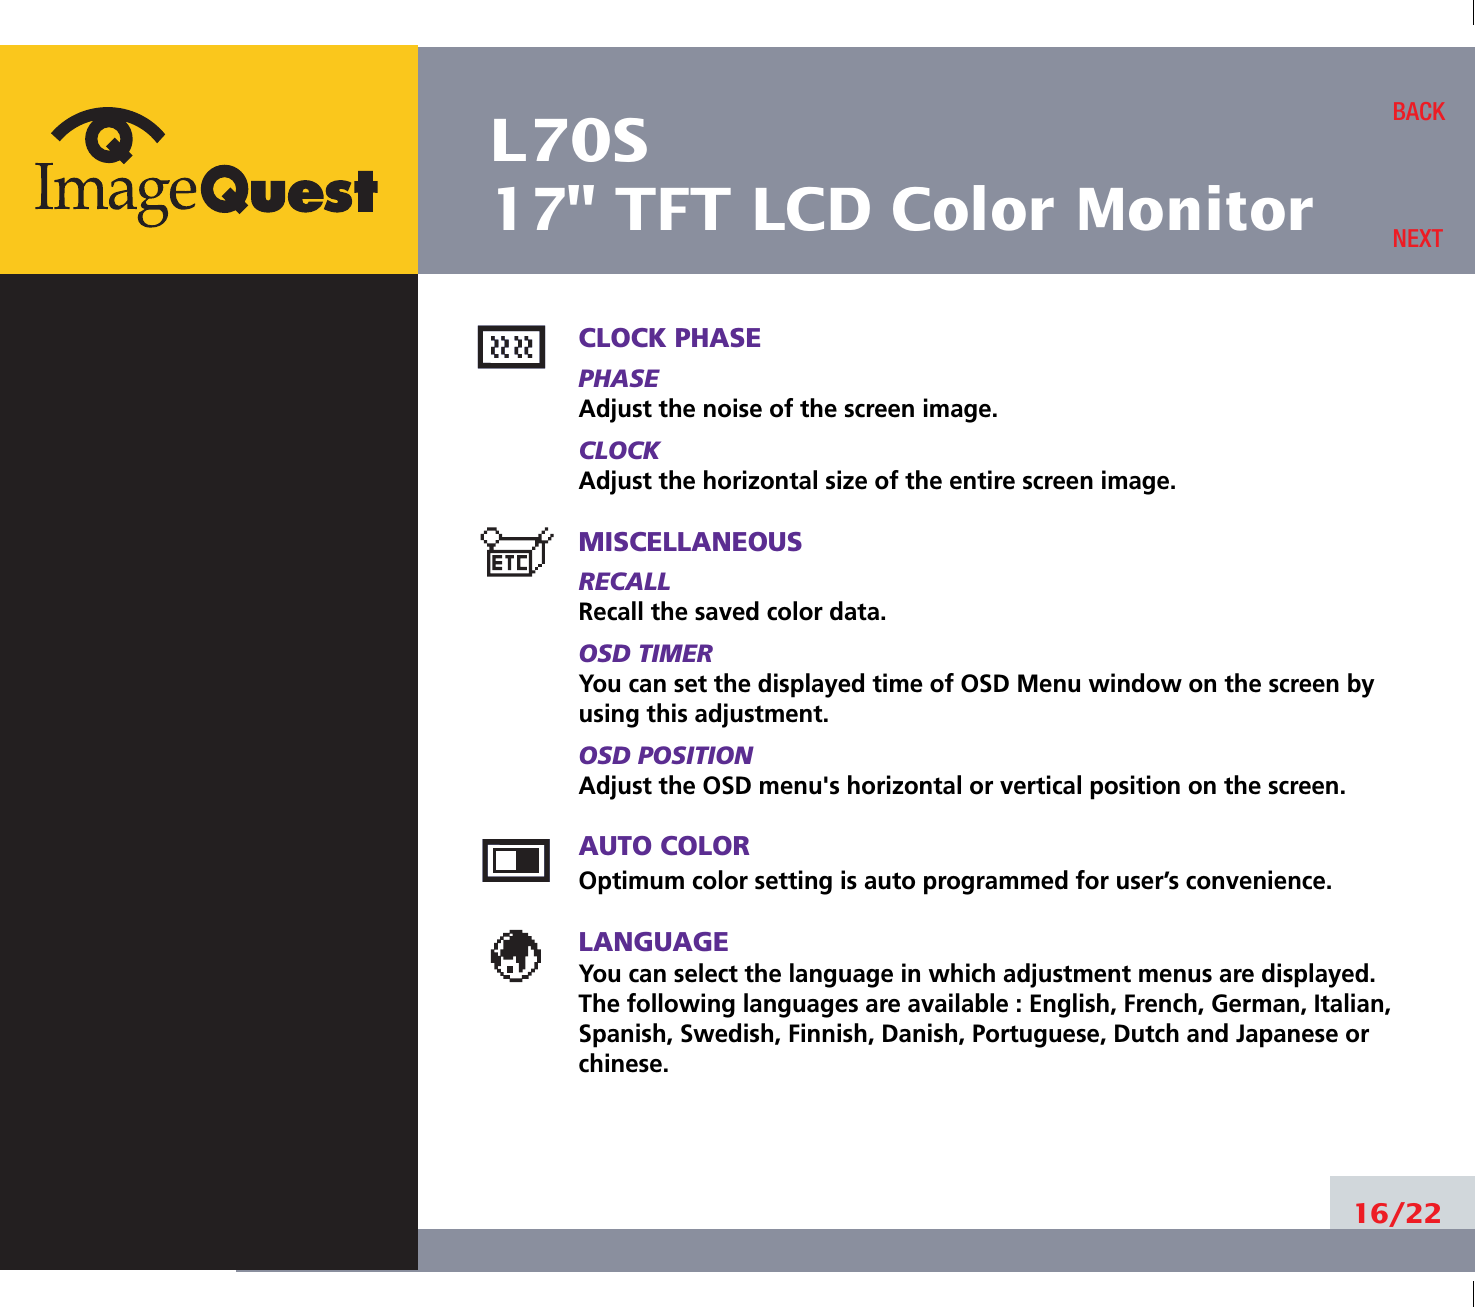 L70S17&quot; TFT LCD Color Monitor16/22BACKNEXTCLOCK PHASEPHASEAdjust the noise of the screen image.CLOCKAdjust the horizontal size of the entire screen image.MISCELLANEOUSRECALL Recall the saved color data.OSD TIMERYou can set the displayed time of OSD Menu window on the screen byusing this adjustment.OSD POSITIONAdjust the OSD menu&apos;s horizontal or vertical position on the screen.AUTO COLOROptimum color setting is auto programmed for user’s convenience.LANGUAGEYou can select the language in which adjustment menus are displayed. The following languages are available : English, French, German, Italian,Spanish, Swedish, Finnish, Danish, Portuguese, Dutch and Japanese orchinese.